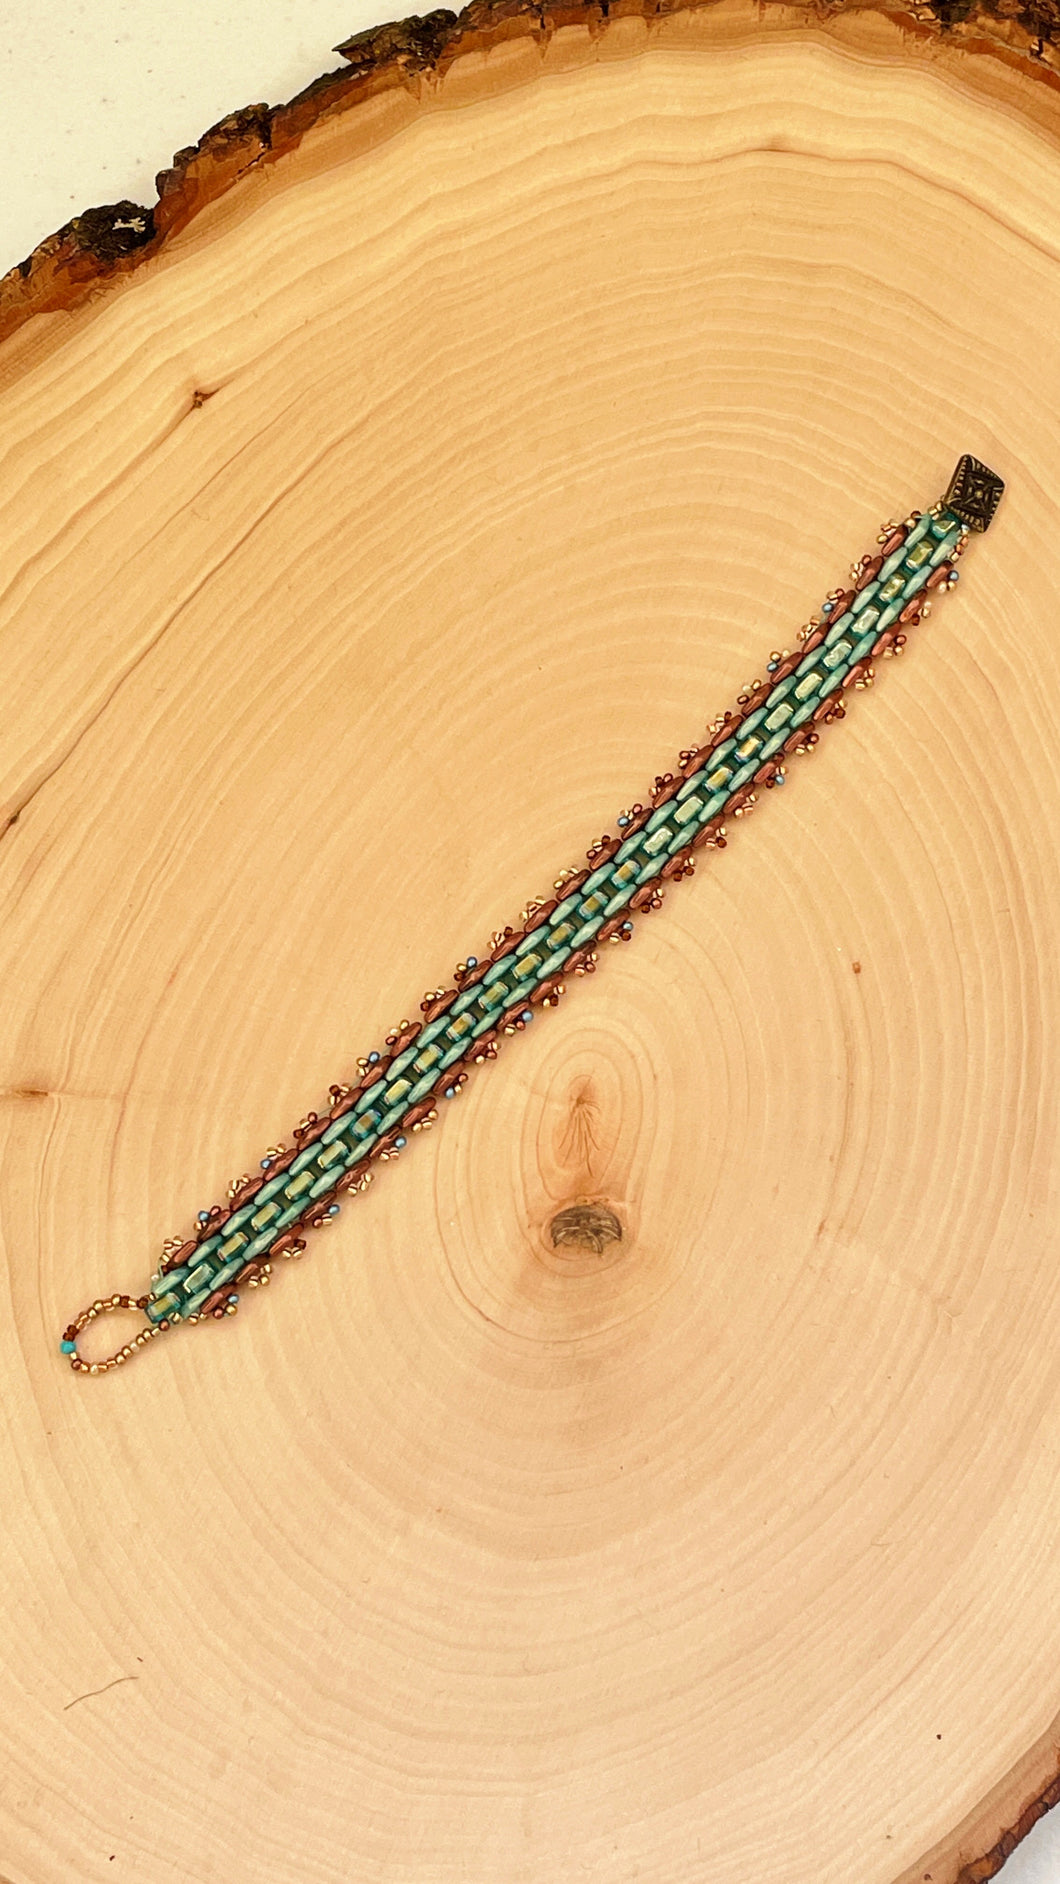 Aqua Woven Crystal Beaded Bracelet With Magnetic Clasp